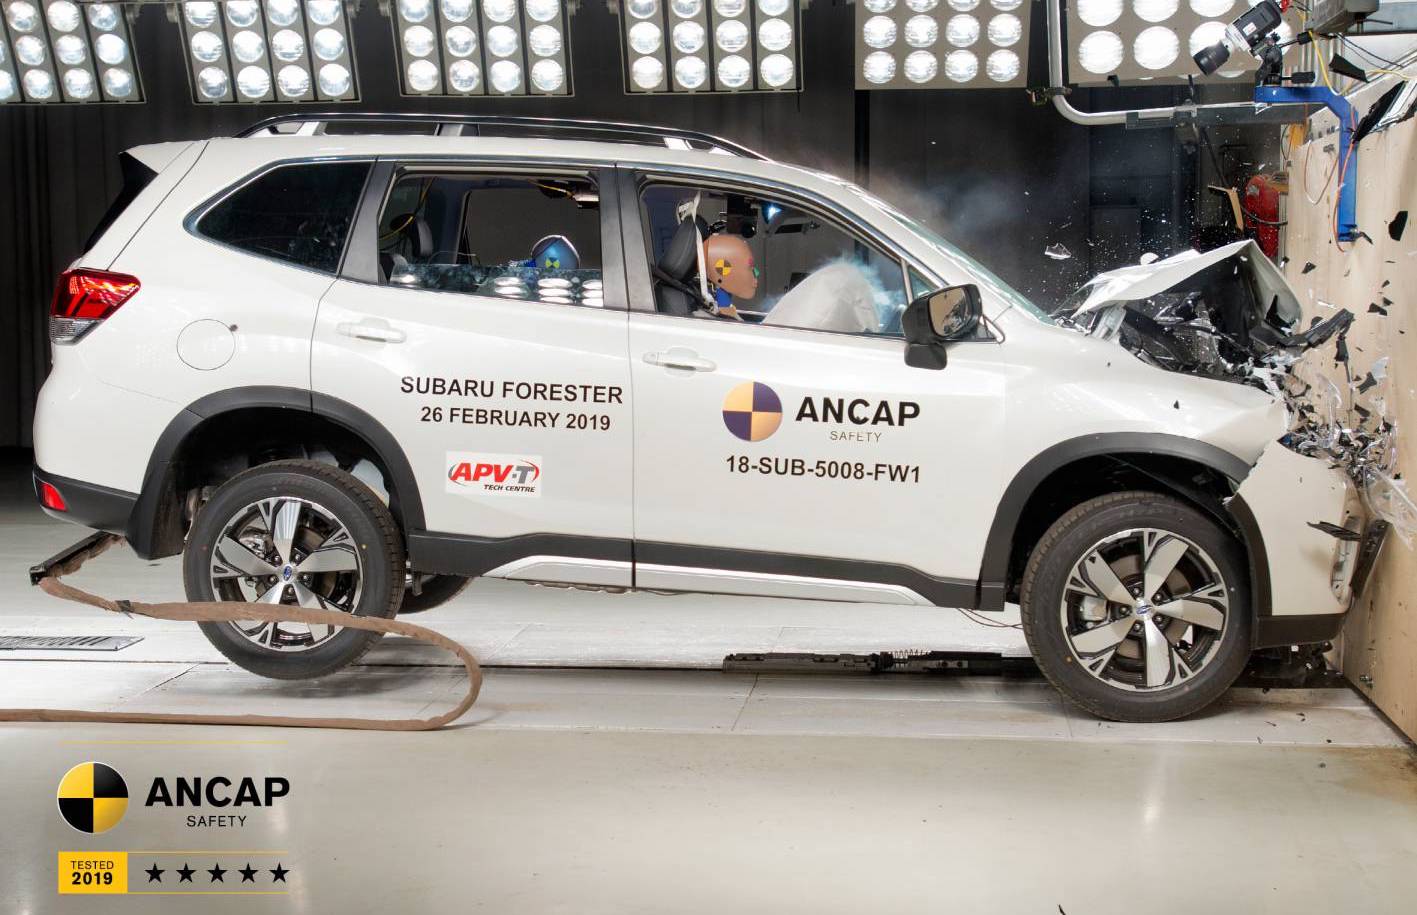 2019 Subaru Forester scores 5-star ANCAP safety rating